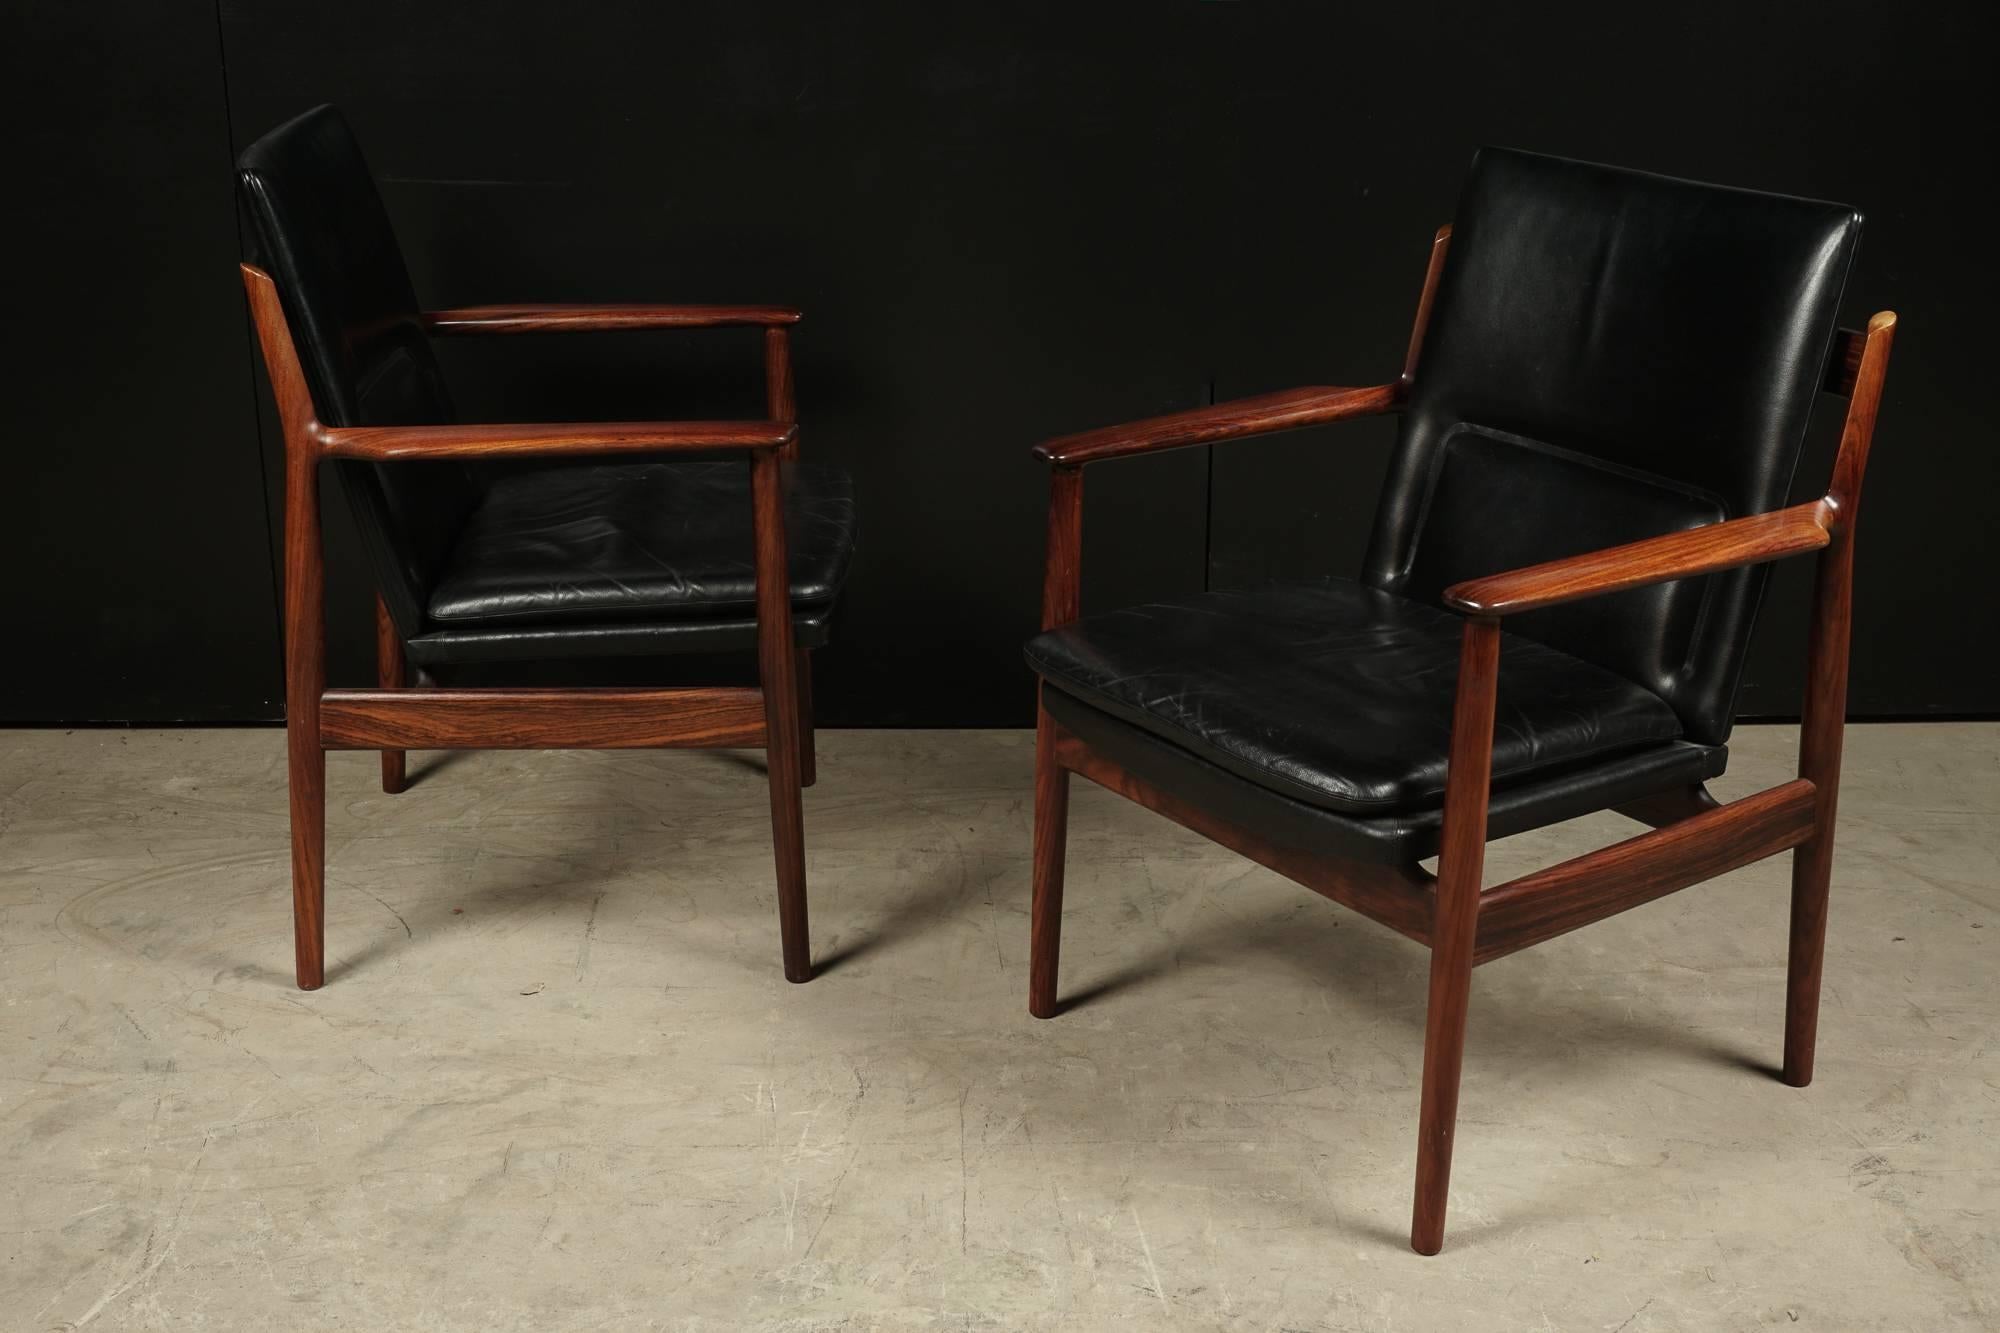 Pair of Lounge Chairs From Denmark, Designed by Arne Vodder, Circa 1960.  Black leather upholstery with a rosewood frame.  Model 431.